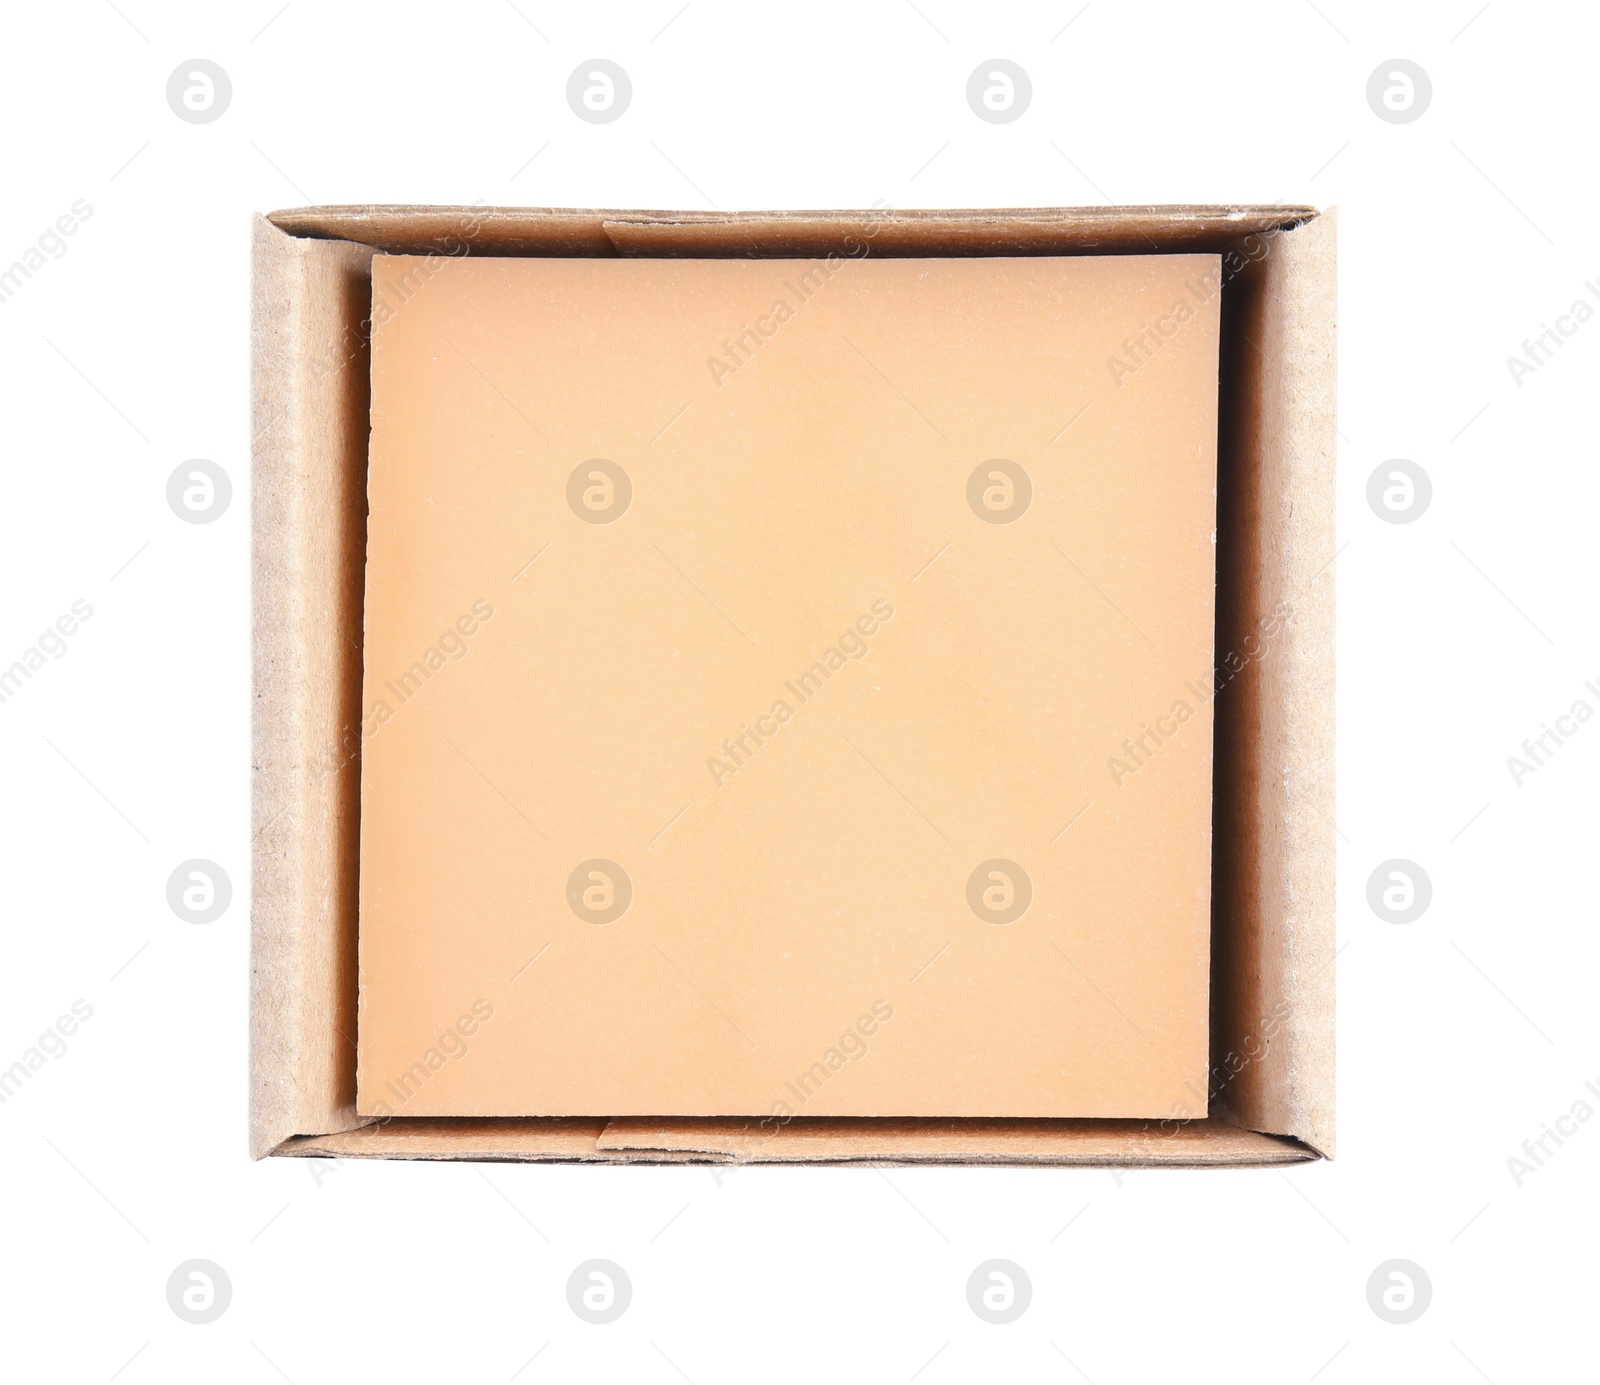 Photo of Hand made soap bar in cardboard package on white background, top view